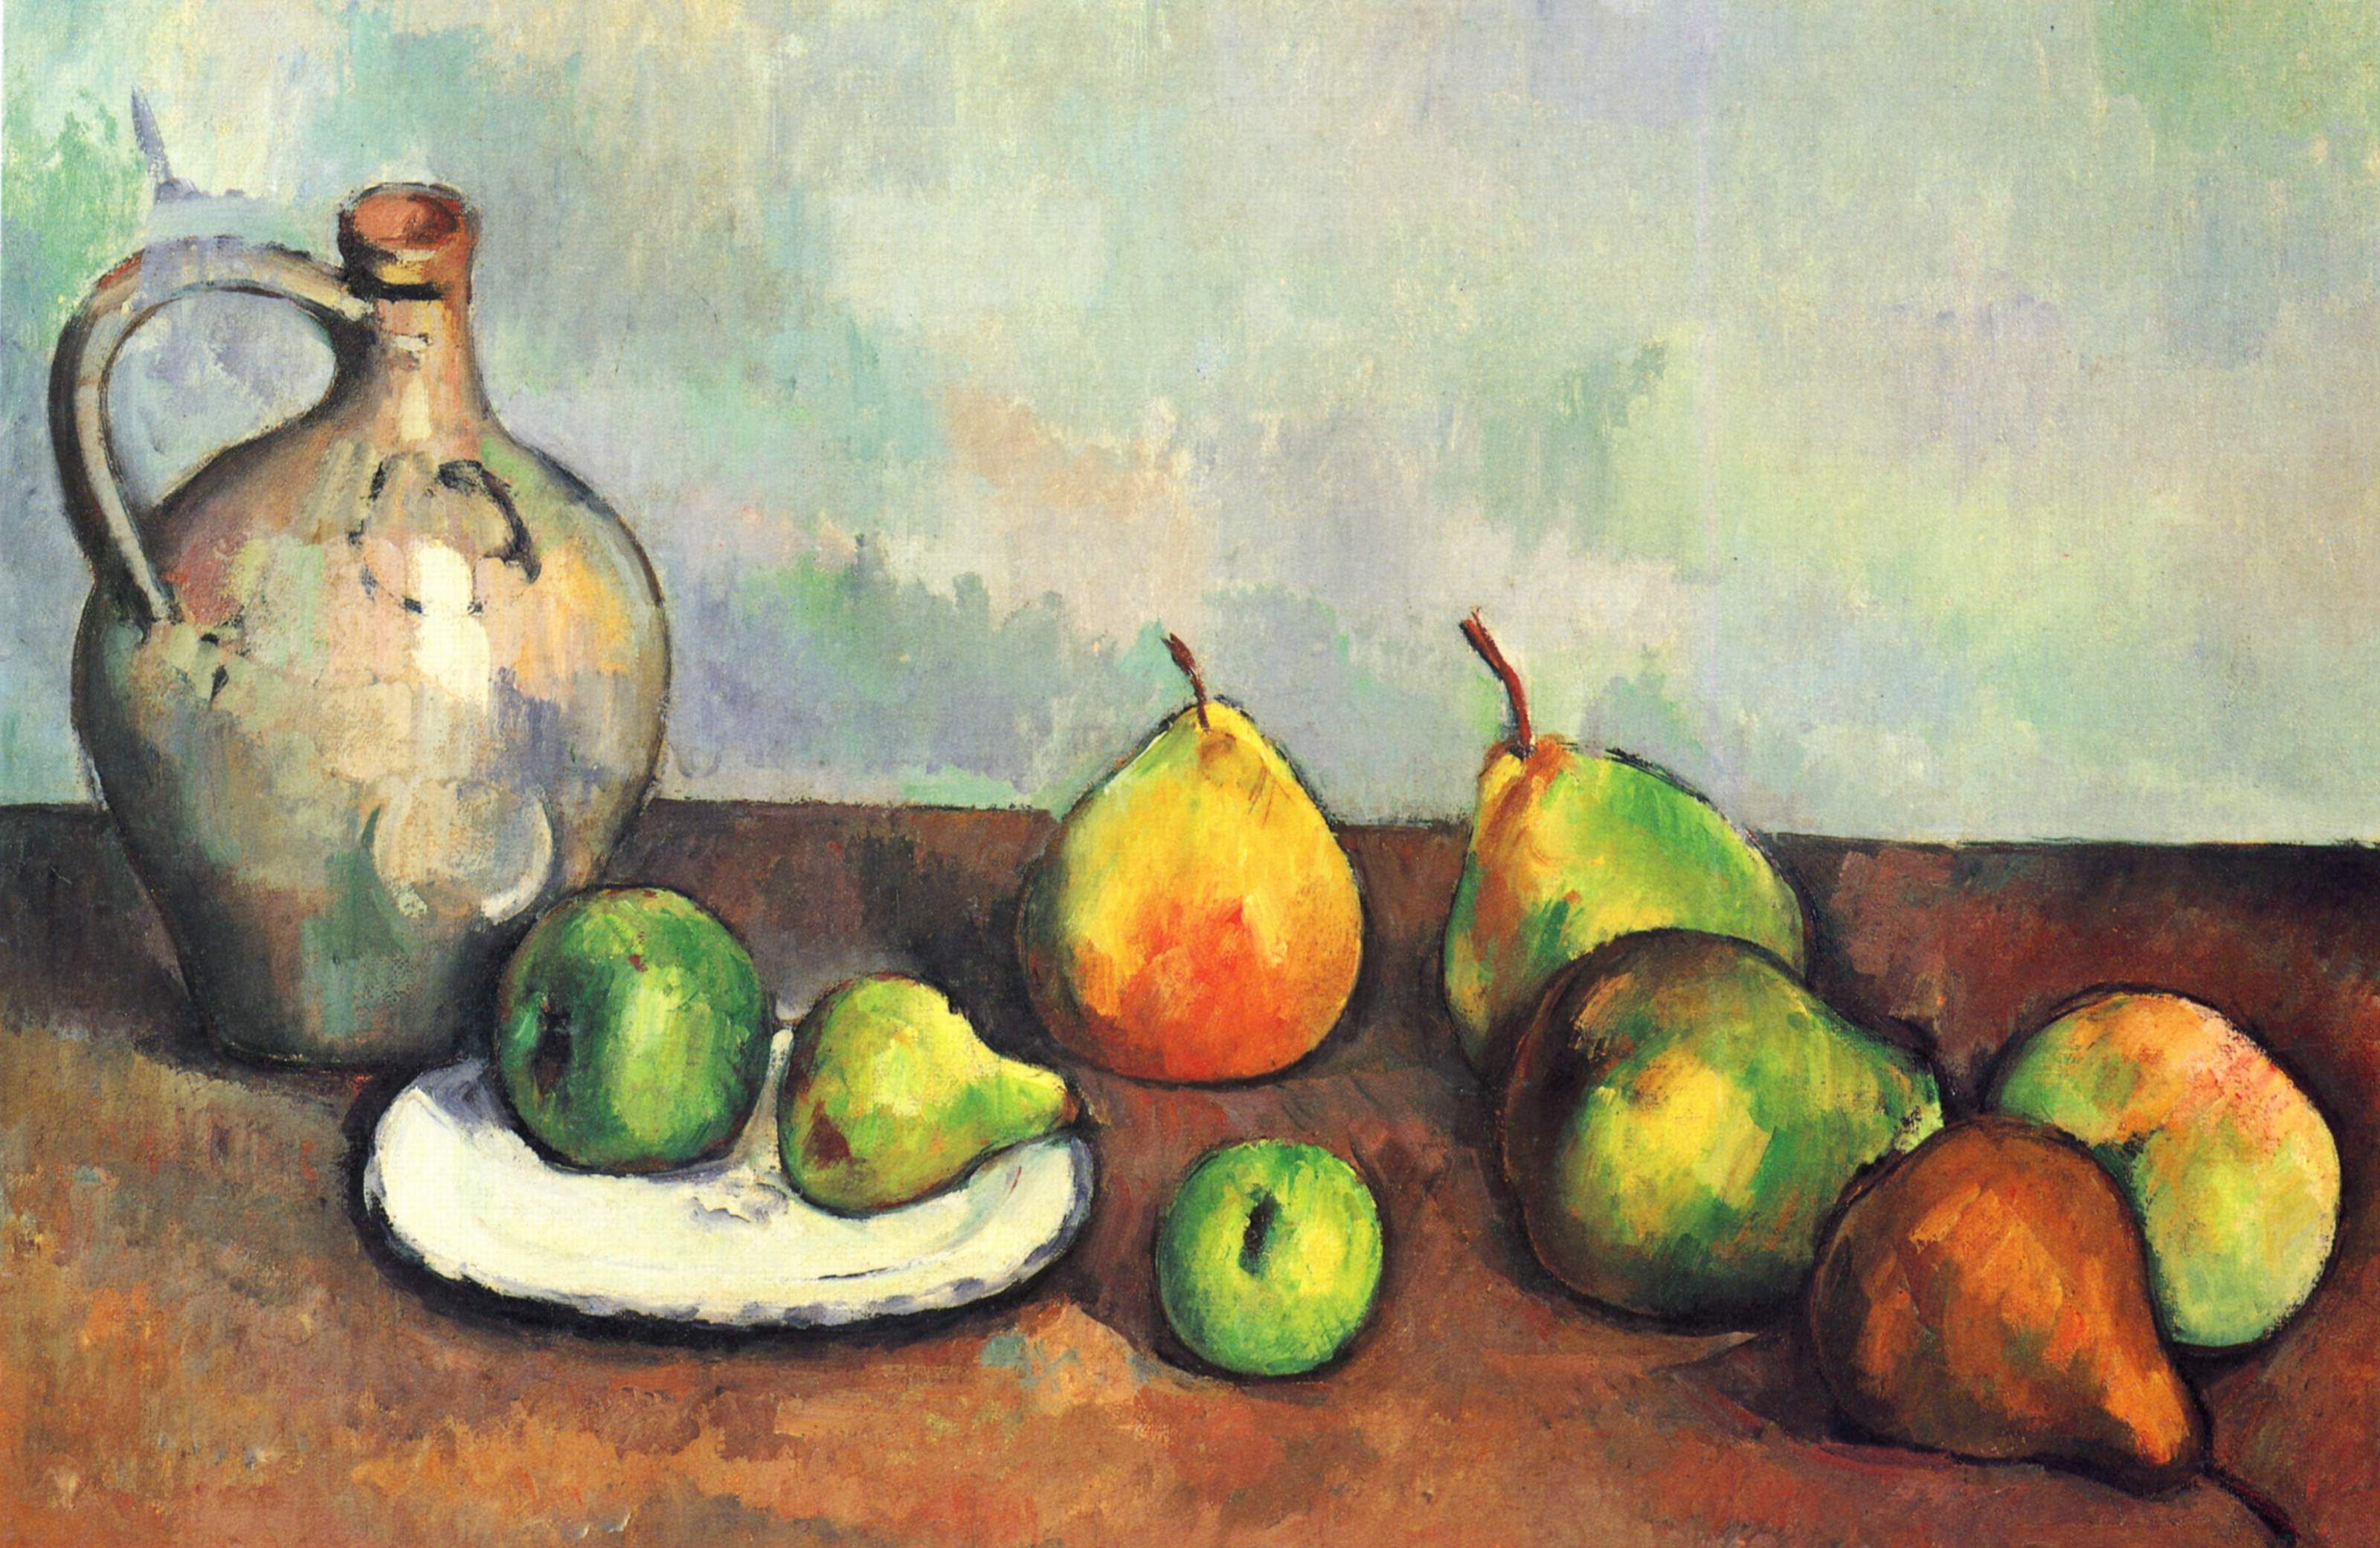 28 attractive the Blue Vase by Paul Cezanne original 2024 free download the blue vase by paul cezanne original of cezanne fruit still life drawing from observation using pastel on intended for cezanne fruit still life drawing from observation using pastel on con